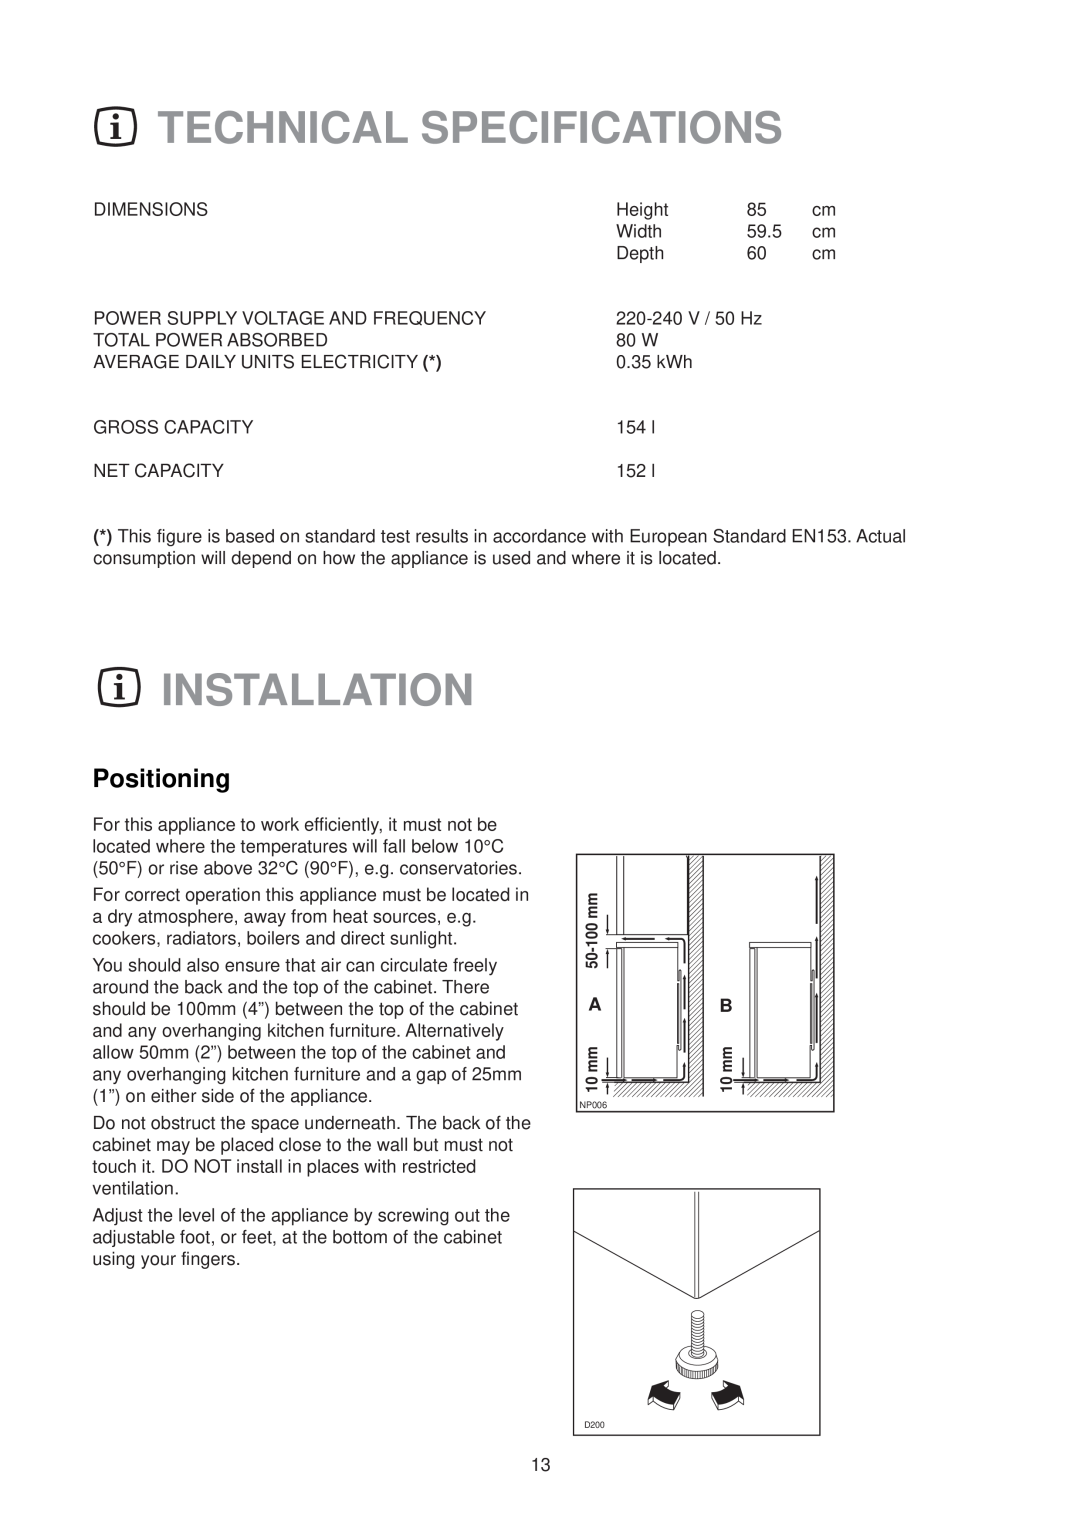 Zanussi ZL 75 W manual Technical Specifications, Installation, Positioning 